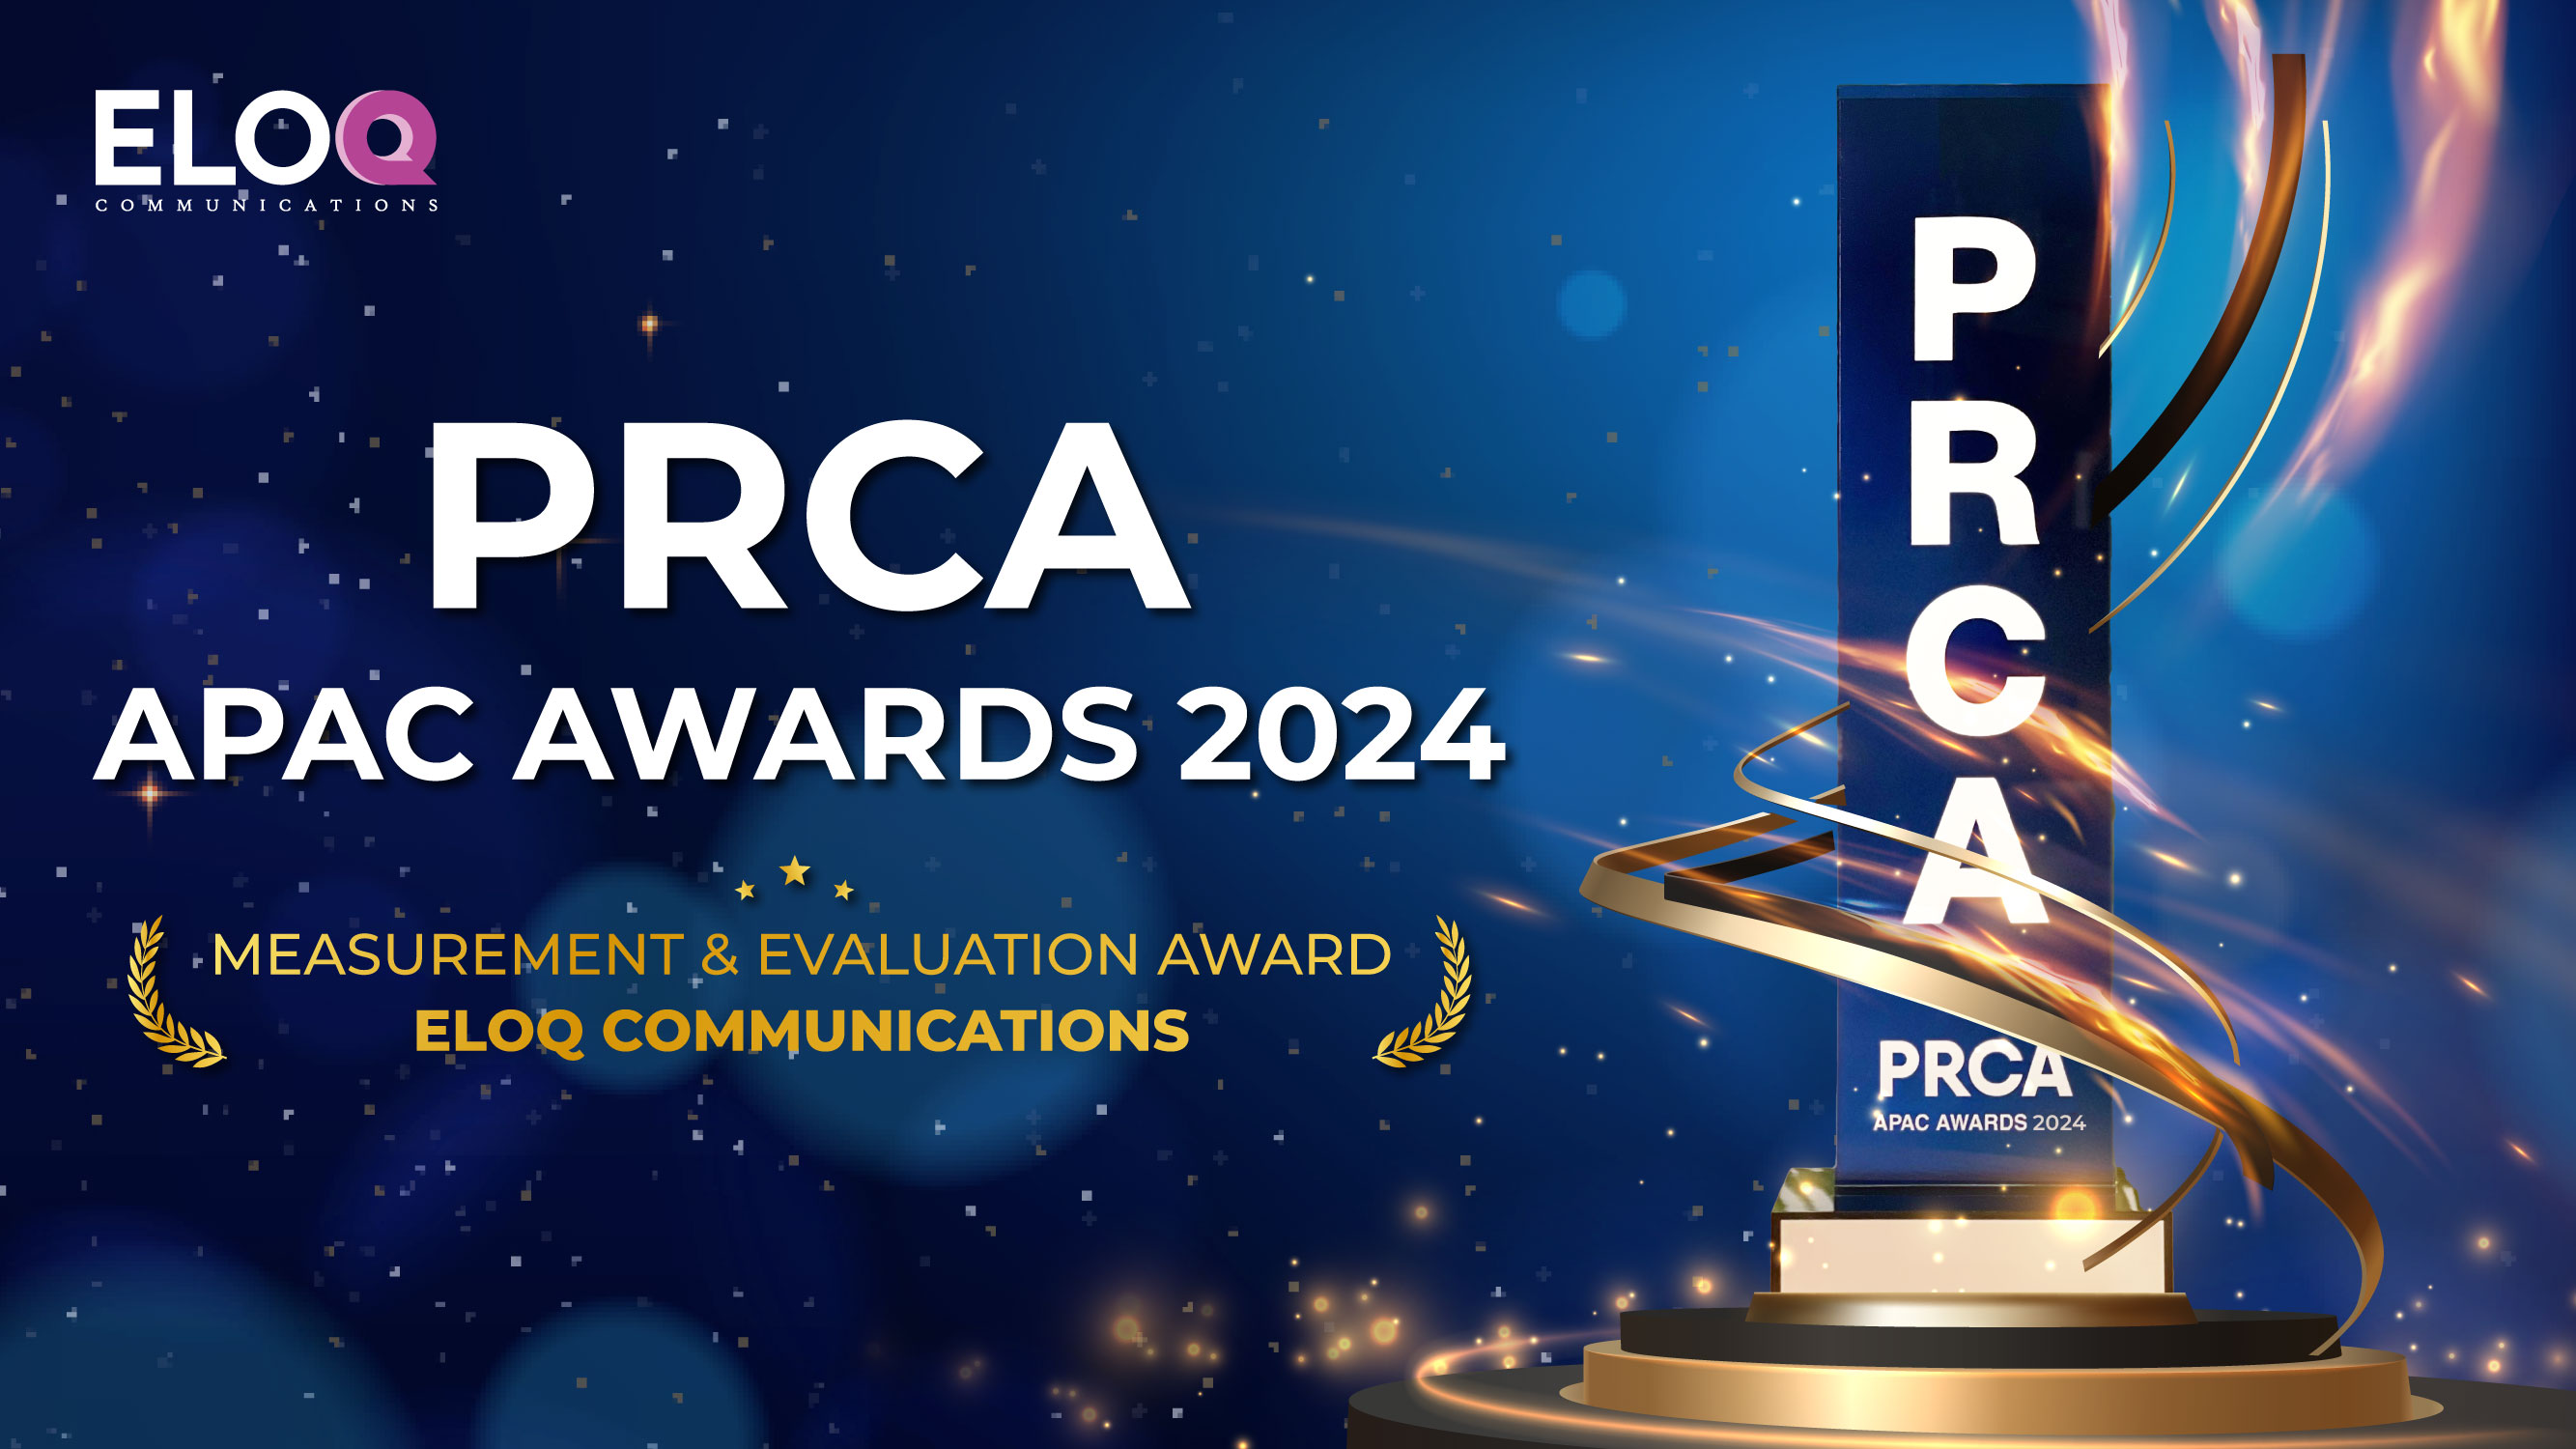 EloQ Communications honored with Measurement and Evaluation Award at PRCA APAC Awards 2024